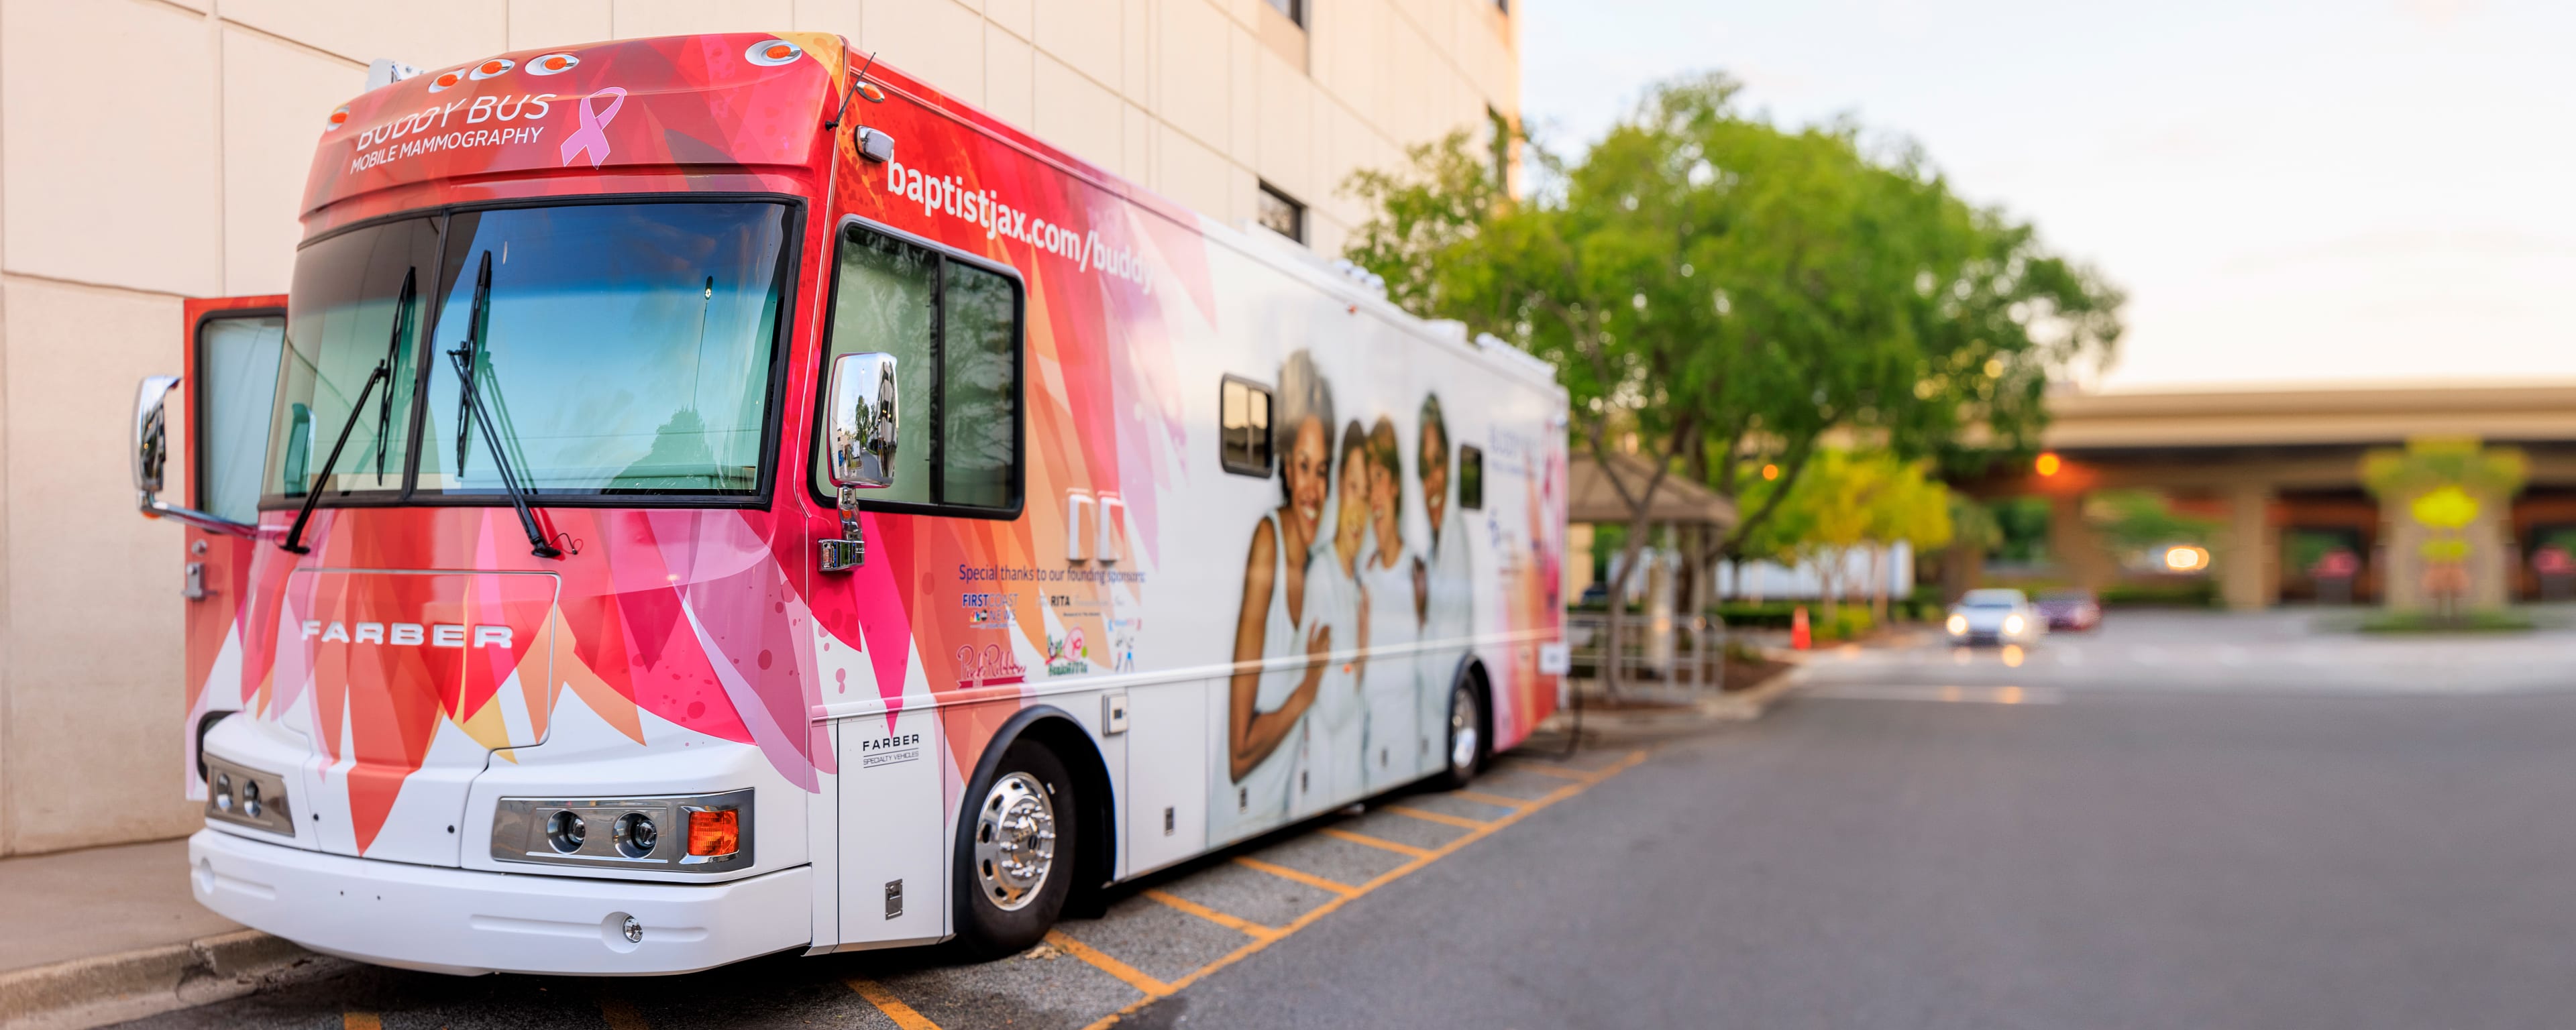 mobile mammography bus (buddy bus) parked outside of a building in bright sunlight